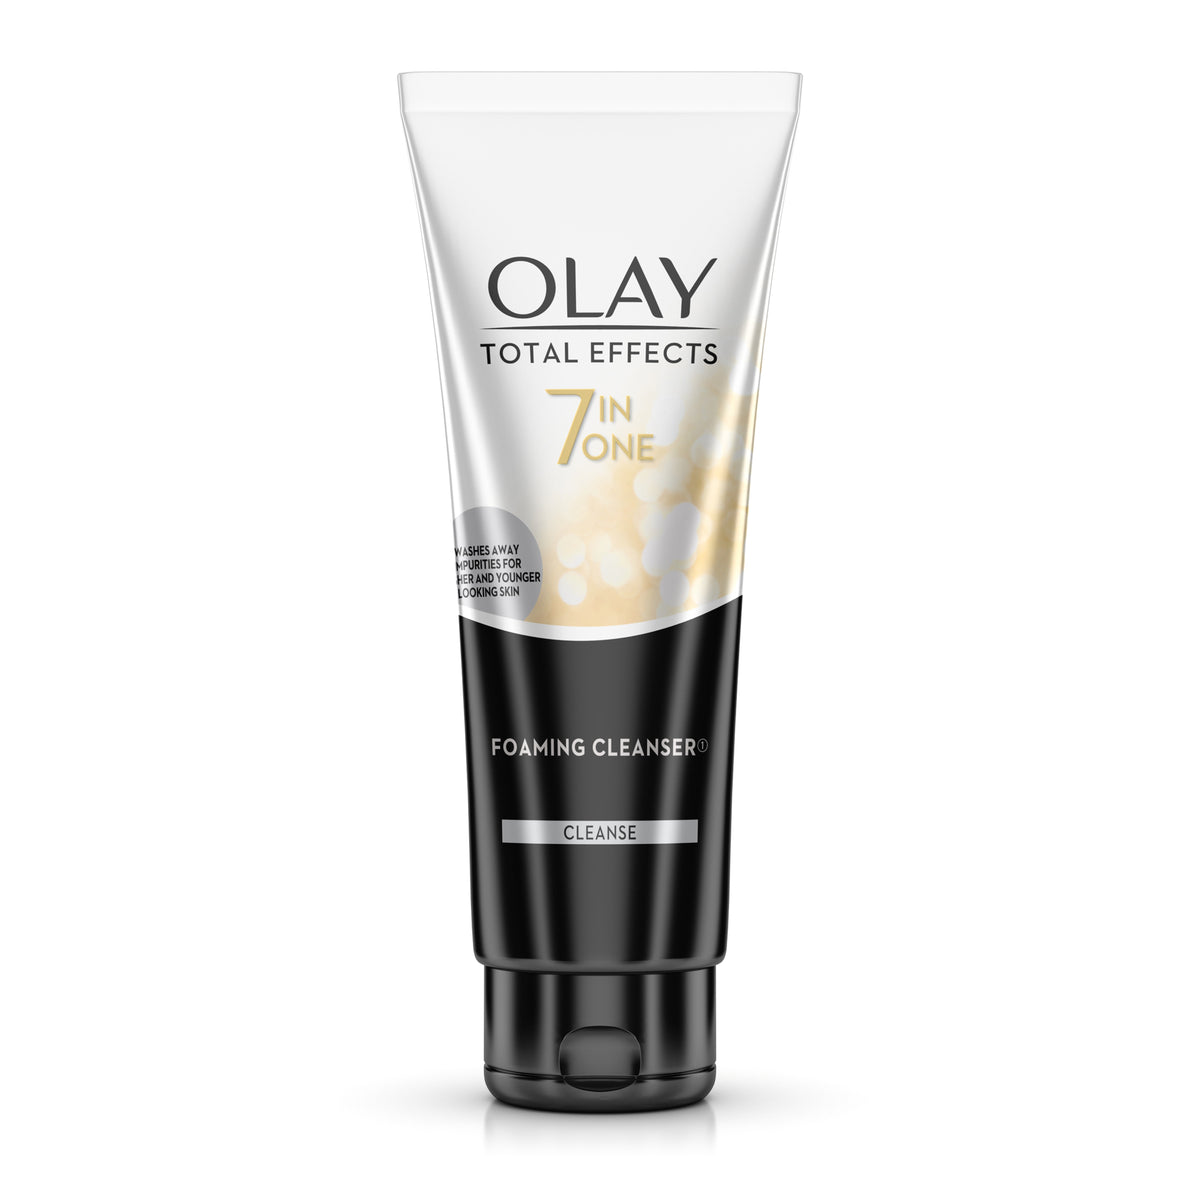 Olay Total Effects 7 In One Foaming Cleanser (100g) Olay